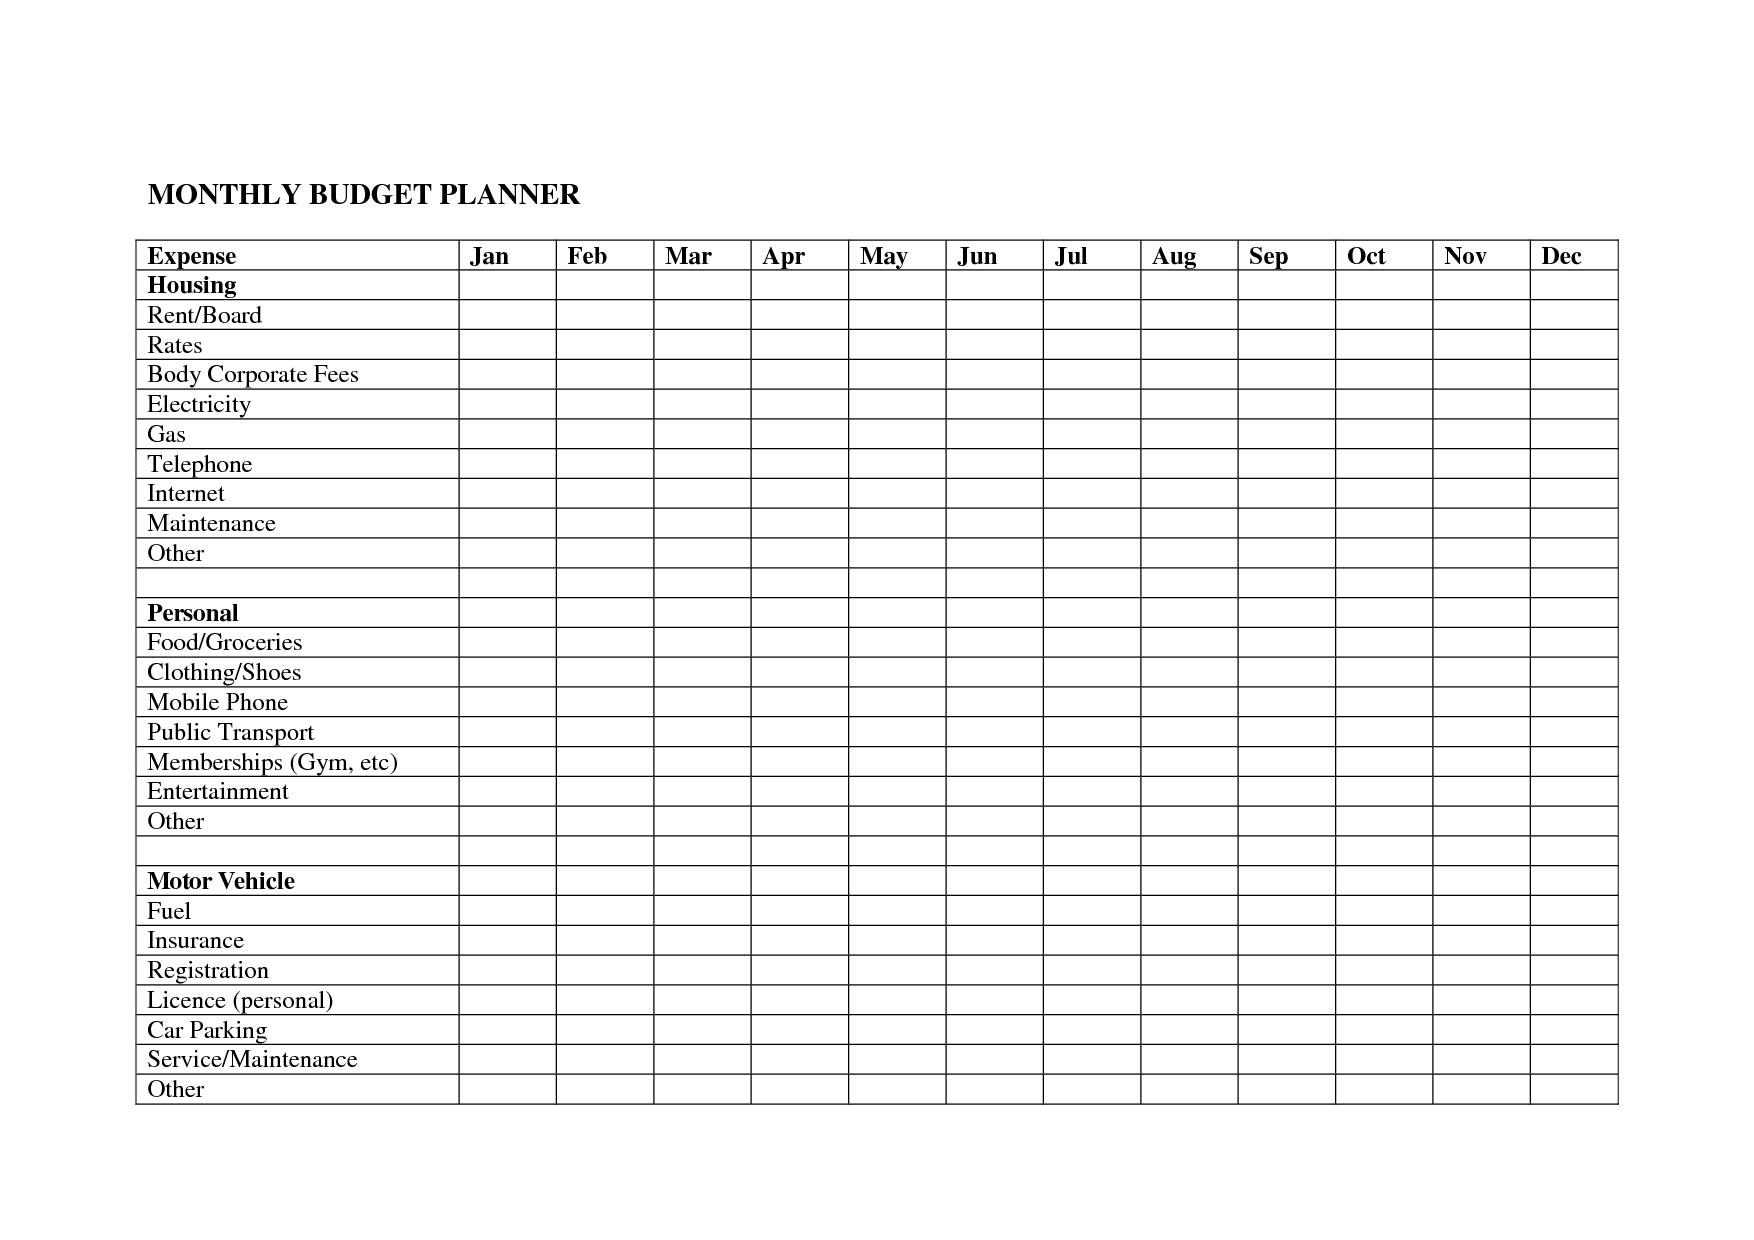 blank-accounting-spreadsheet-template-spreadsheet-templates-for-business-blank-spreadsheet